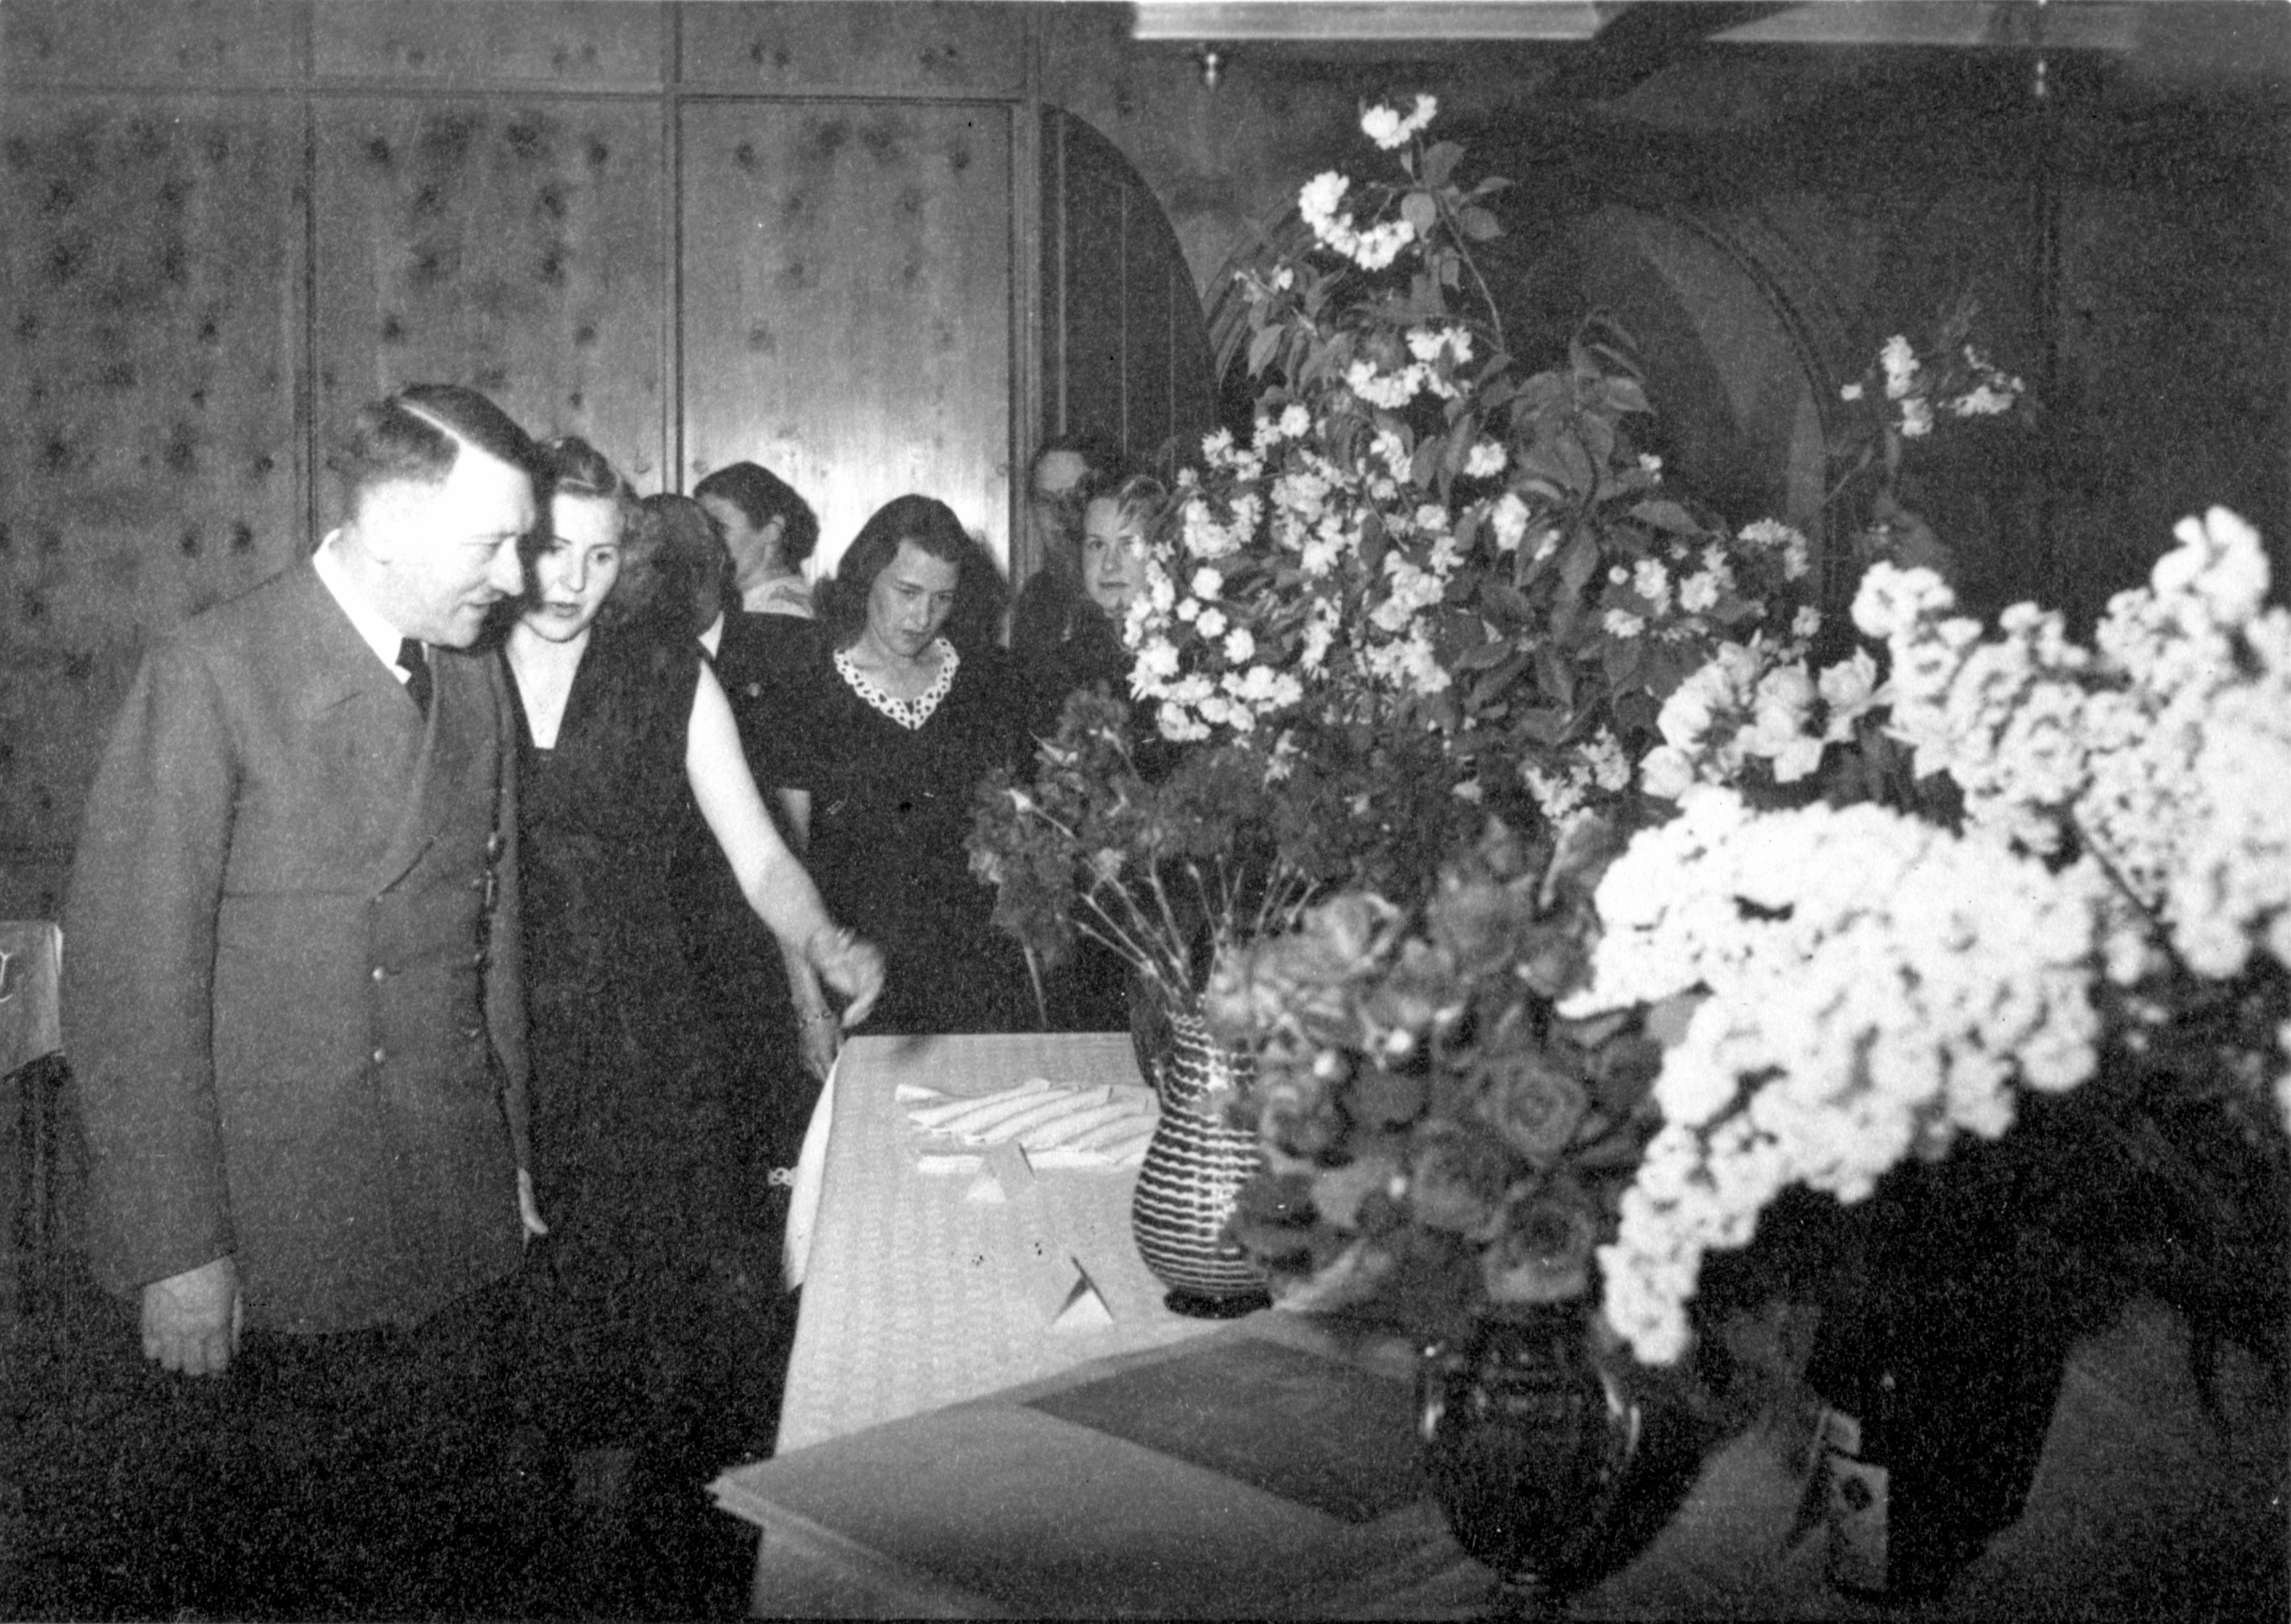 Adolf Hitler and Eva Braun look at the gifts on the occasion of the 54th birthday of the Führer, from Eva Braun's albums